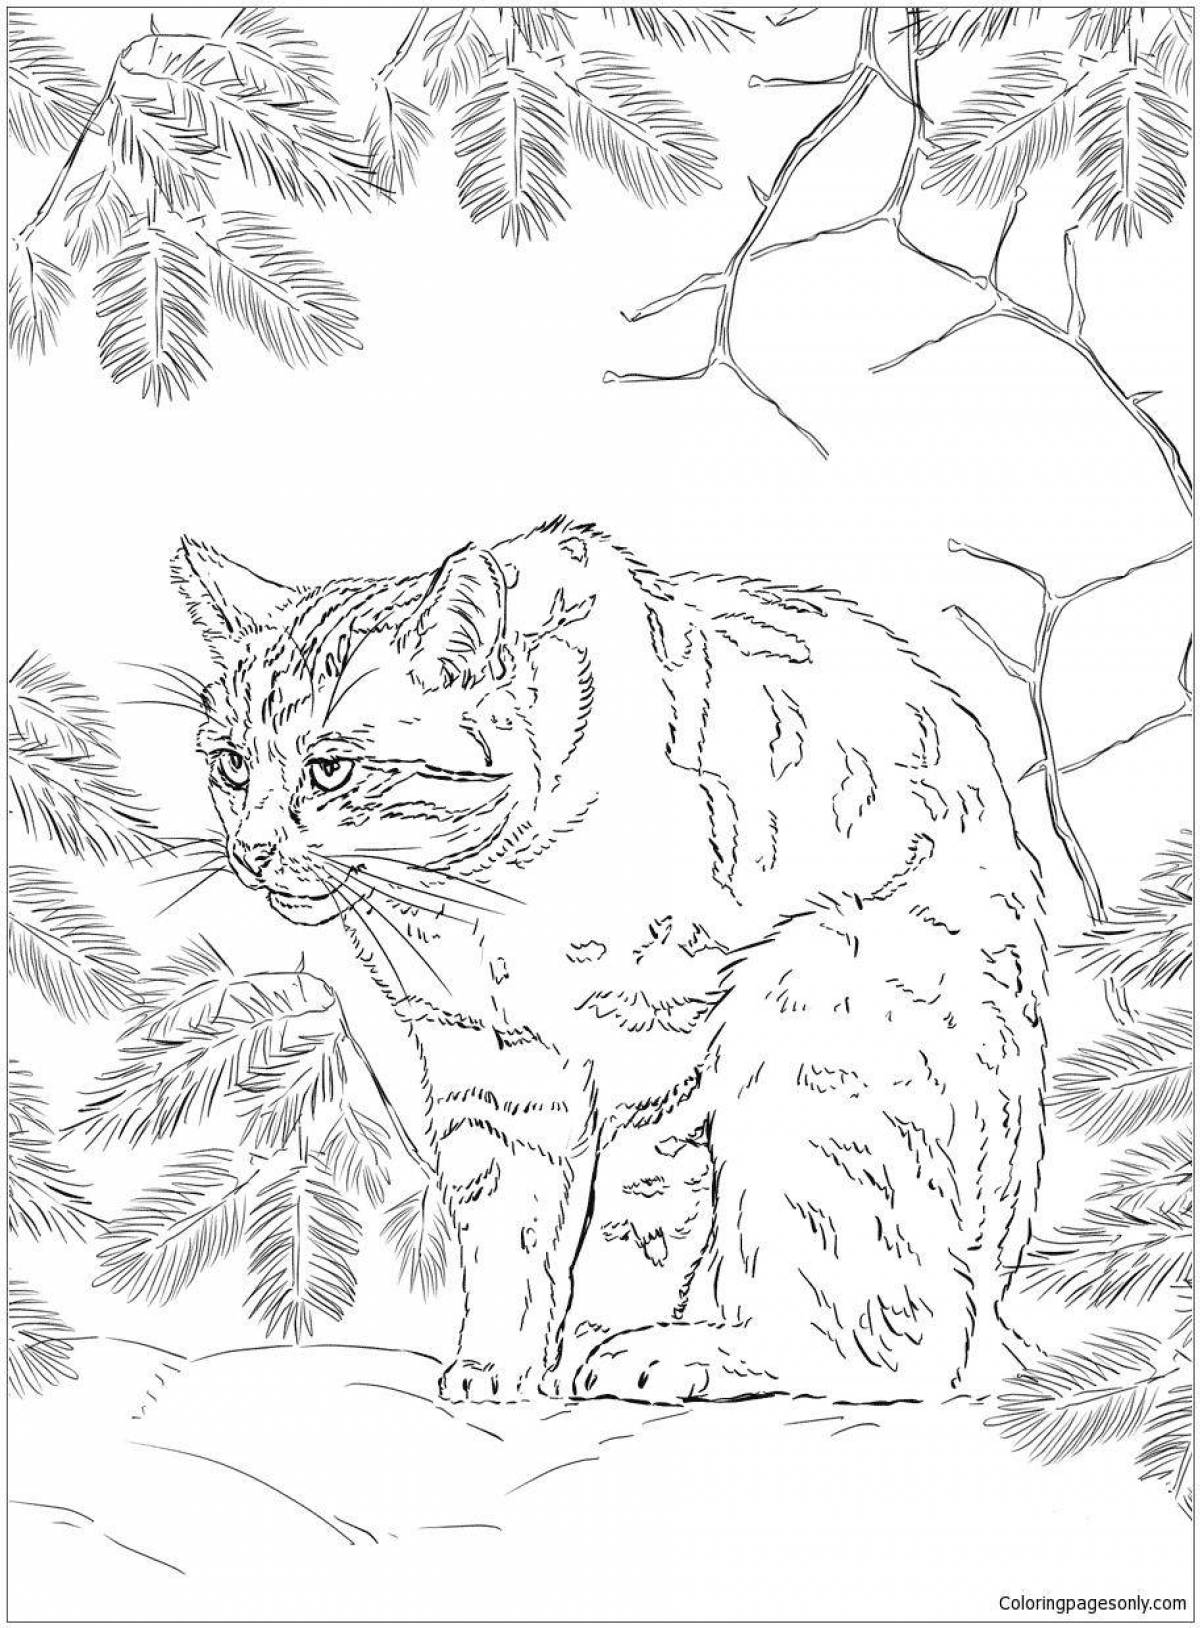 Radiant cane cat coloring page